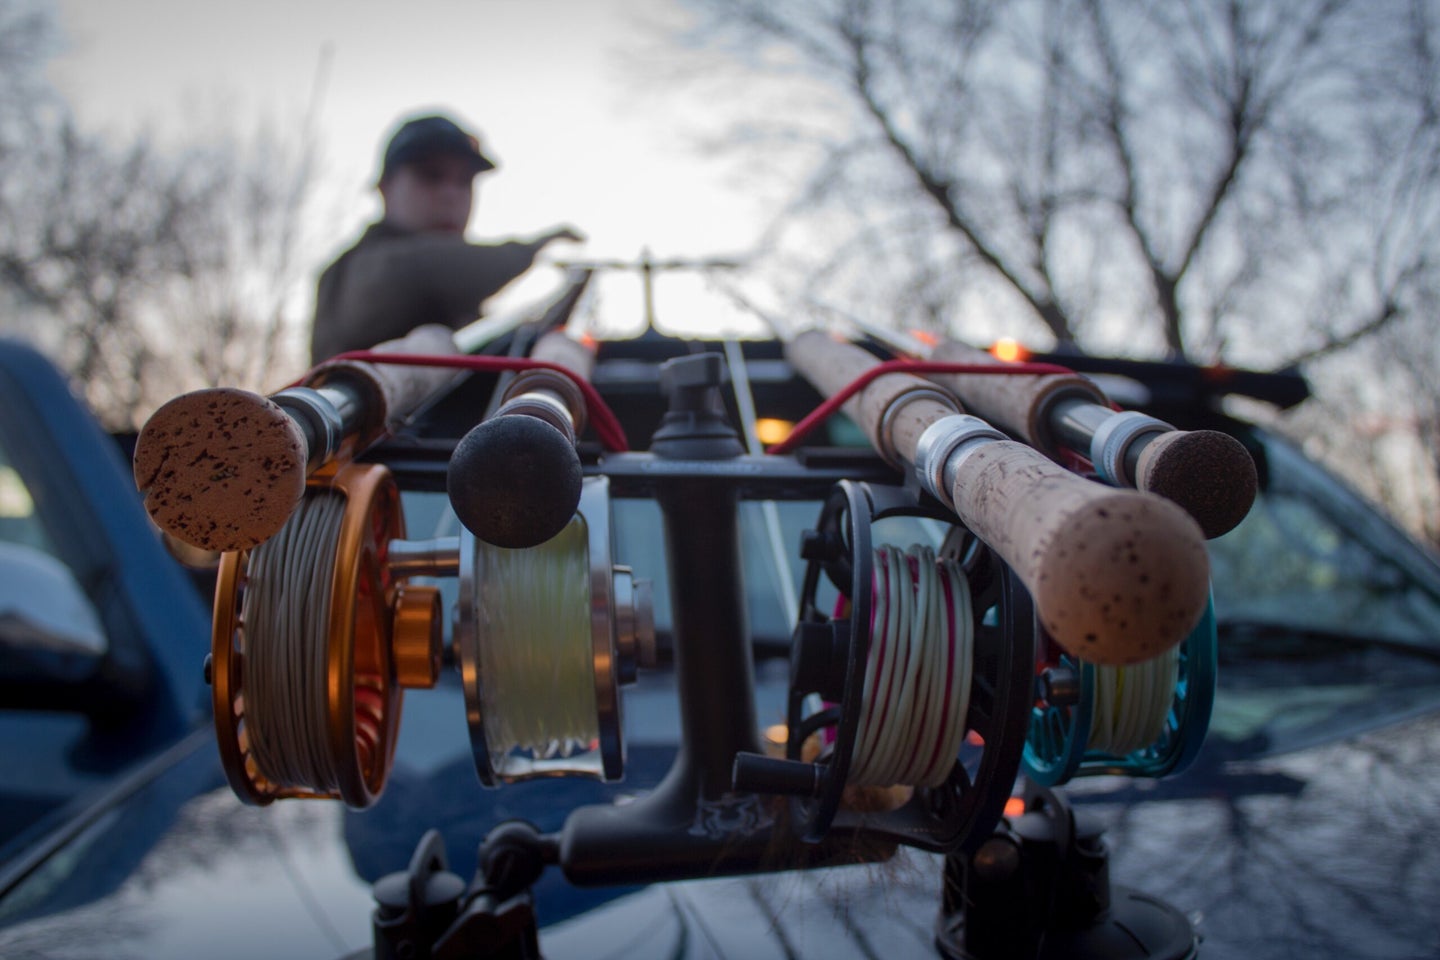 fly rods and reels